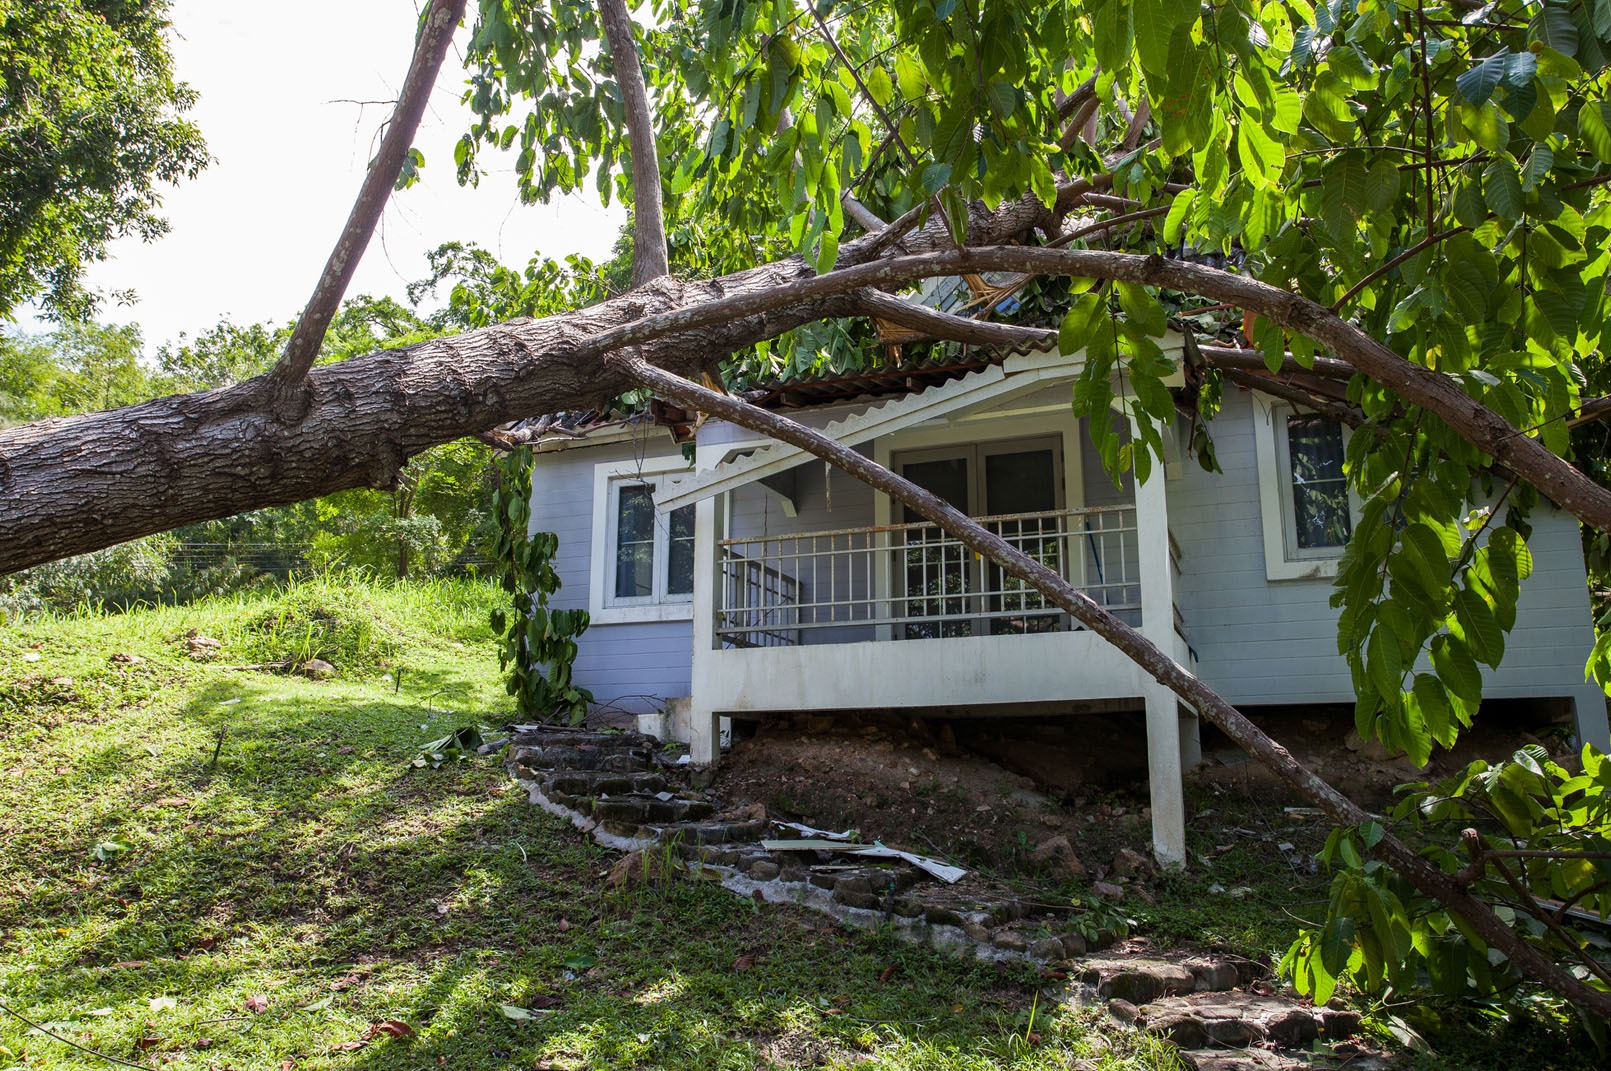 Storm Damage and Insurance Claims